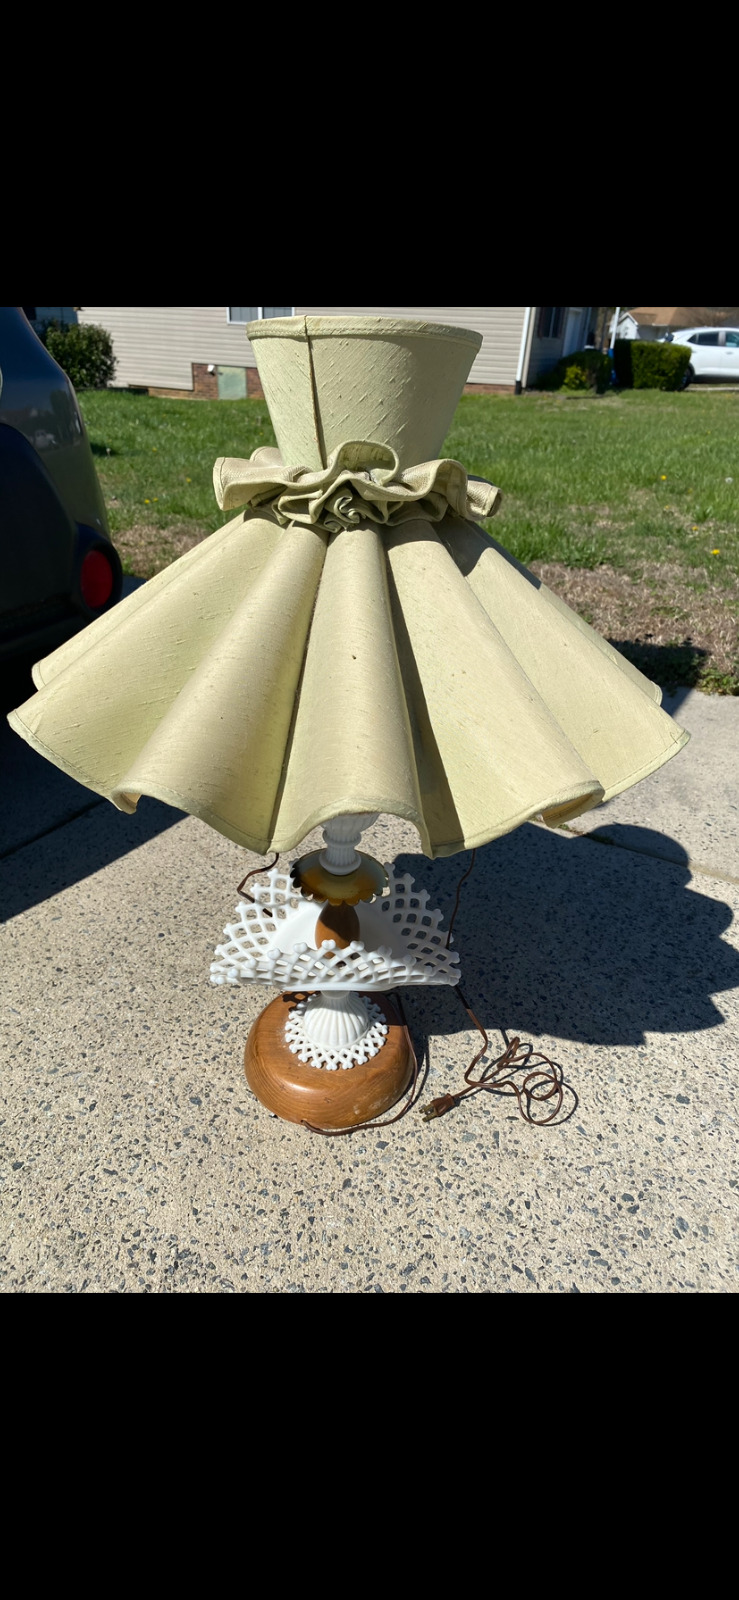 Vintage milk glass lamp, good condition works great 